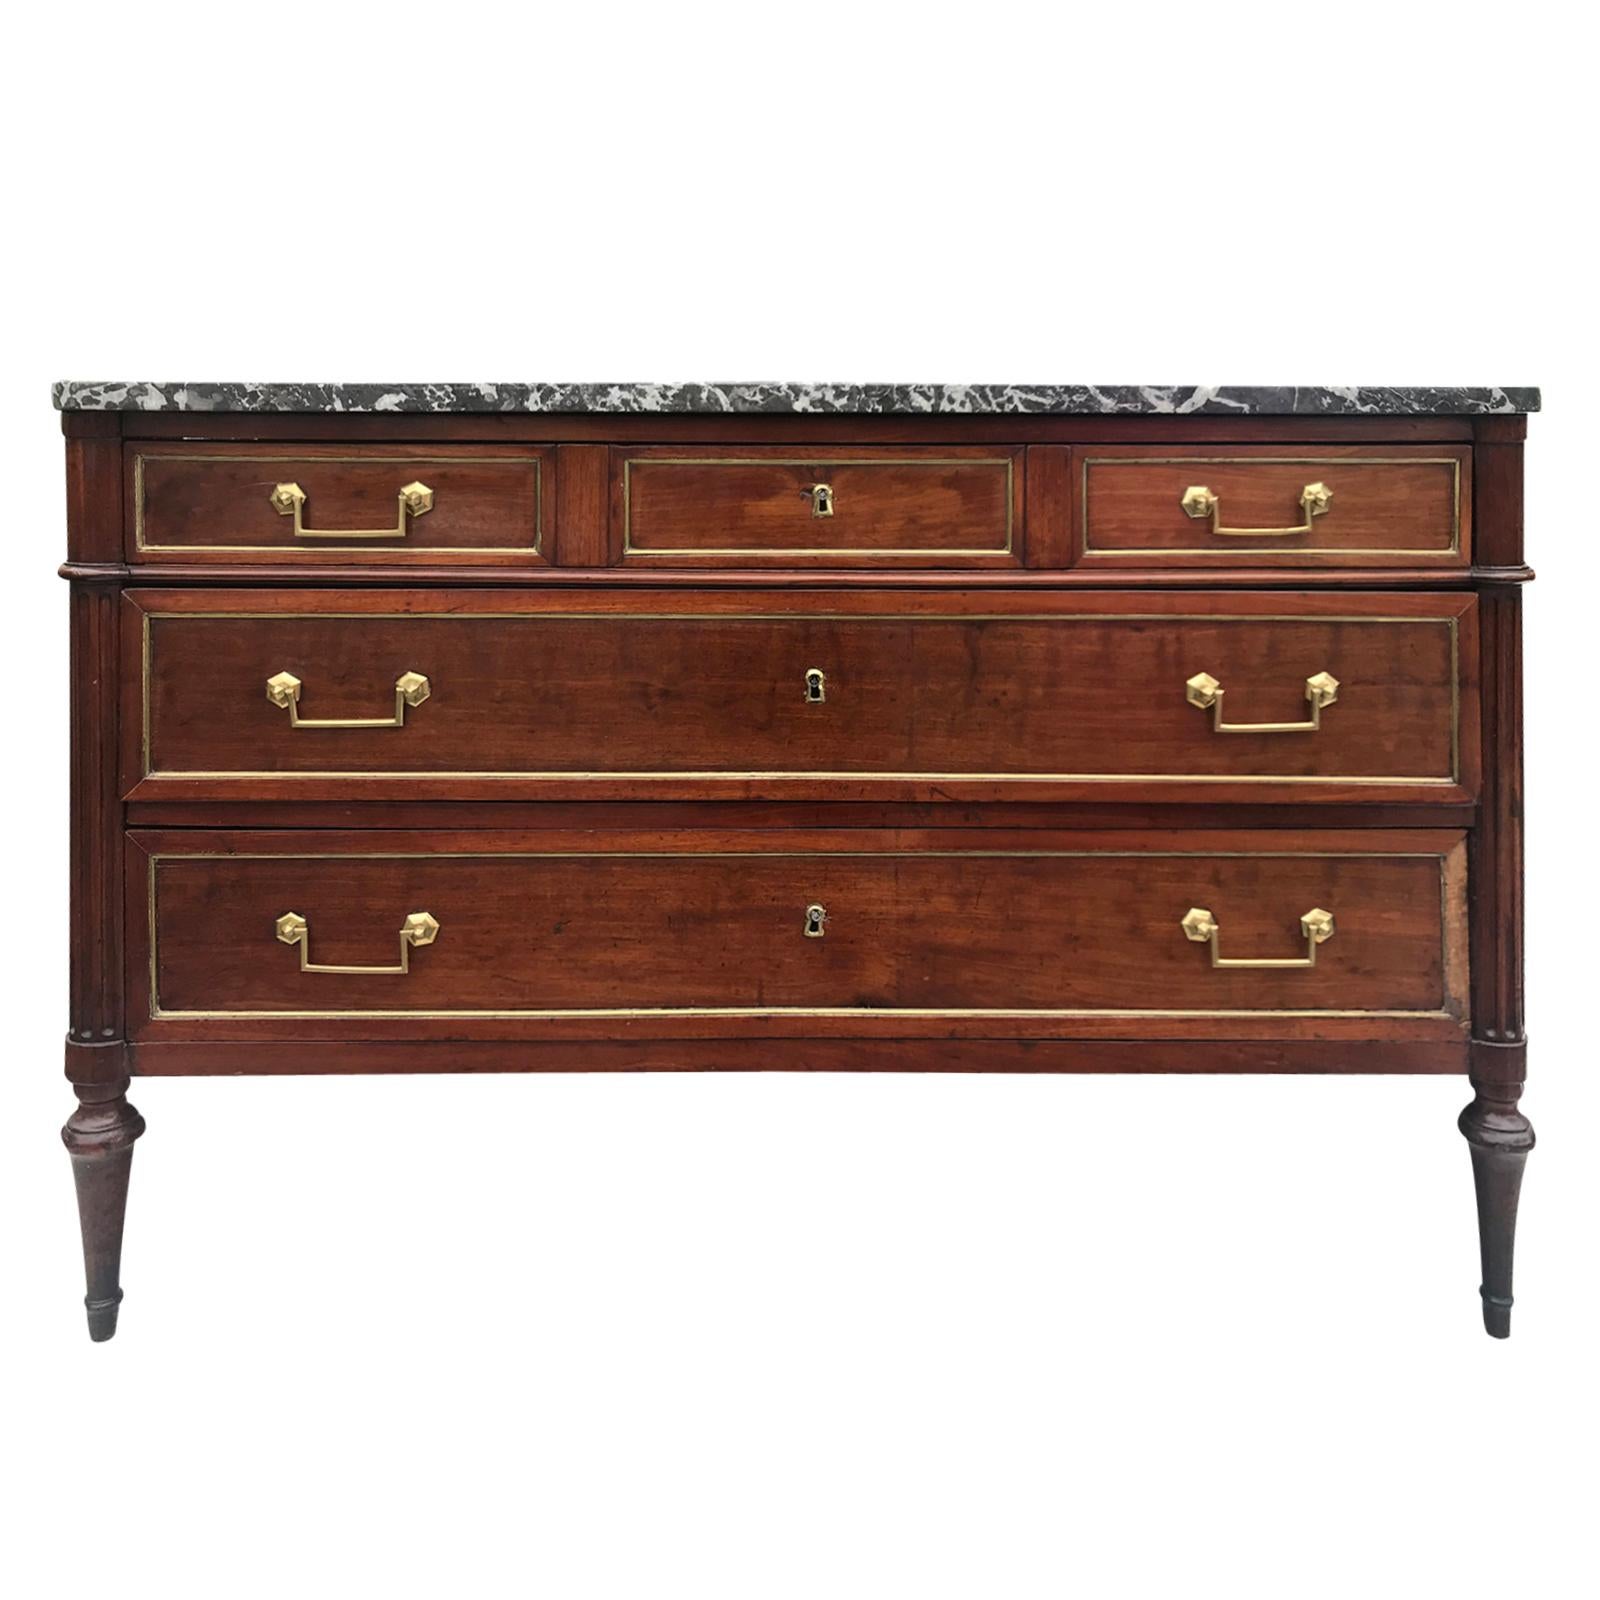 French Mahogany Commode with Marble Top in the Style of Louis XVI, circa 1800